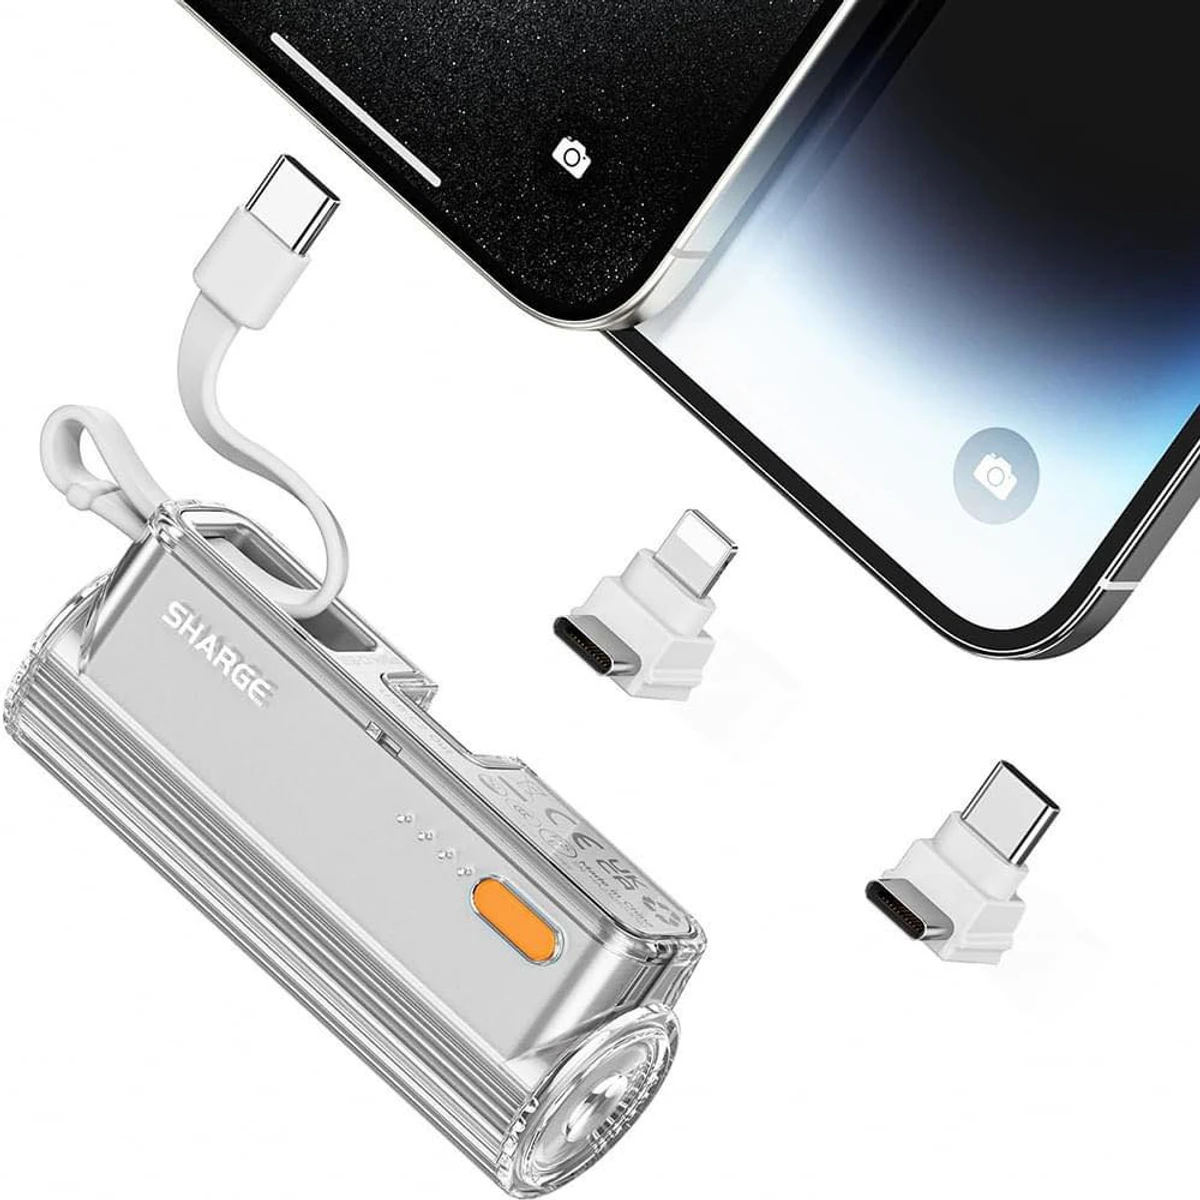 SHARGE Flow Mini 5000mAh 12W Power Bank with Lighting and Type-C Connector and Built-in Type-C Cable